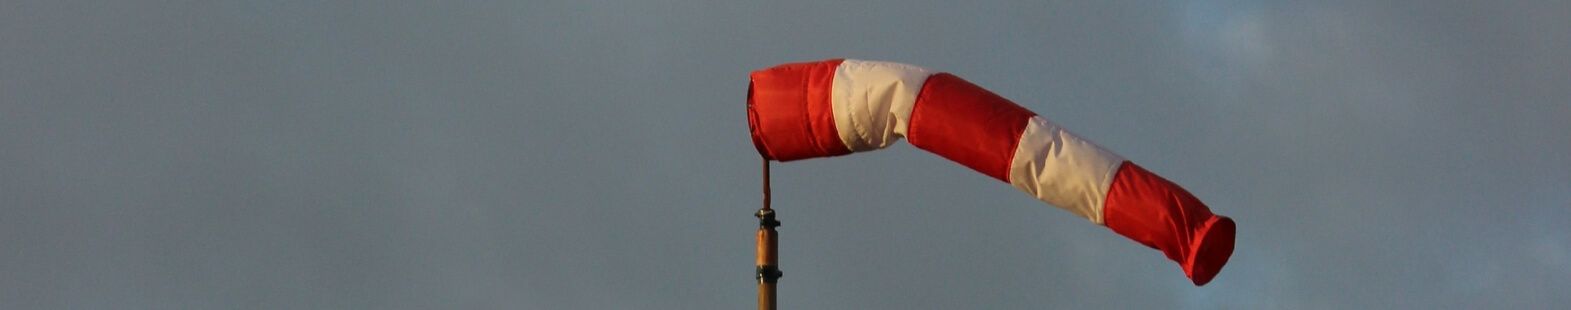 Image shows a red and white wind sock against a cloudy sky. Photo for the Wind at Lake Saint Charles article by Richard Leduc